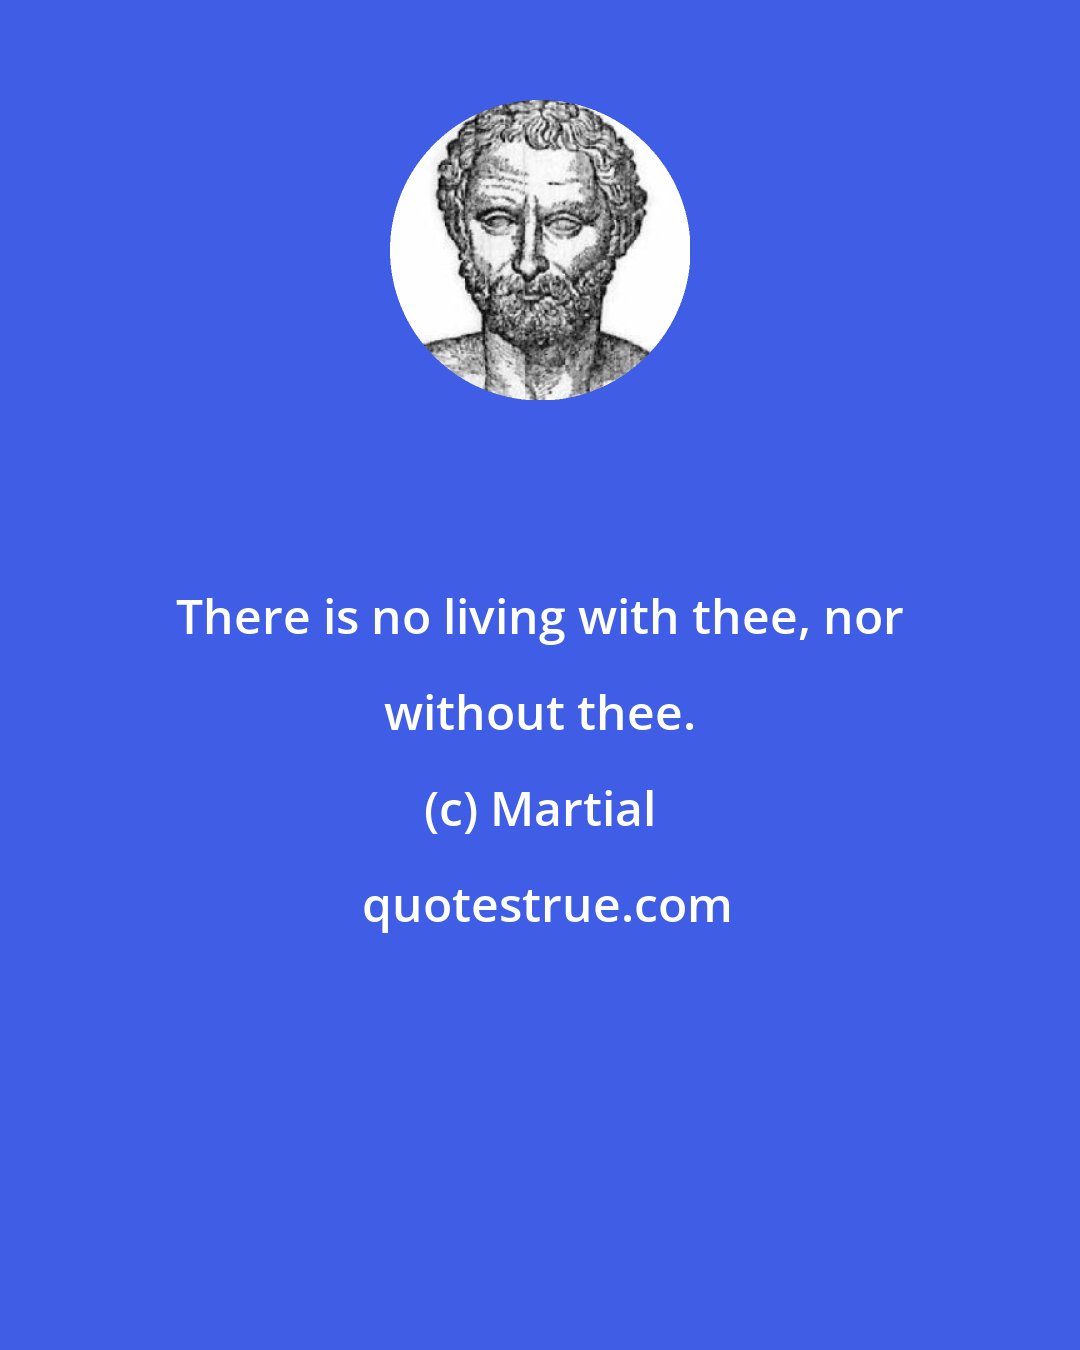 Martial: There is no living with thee, nor without thee.